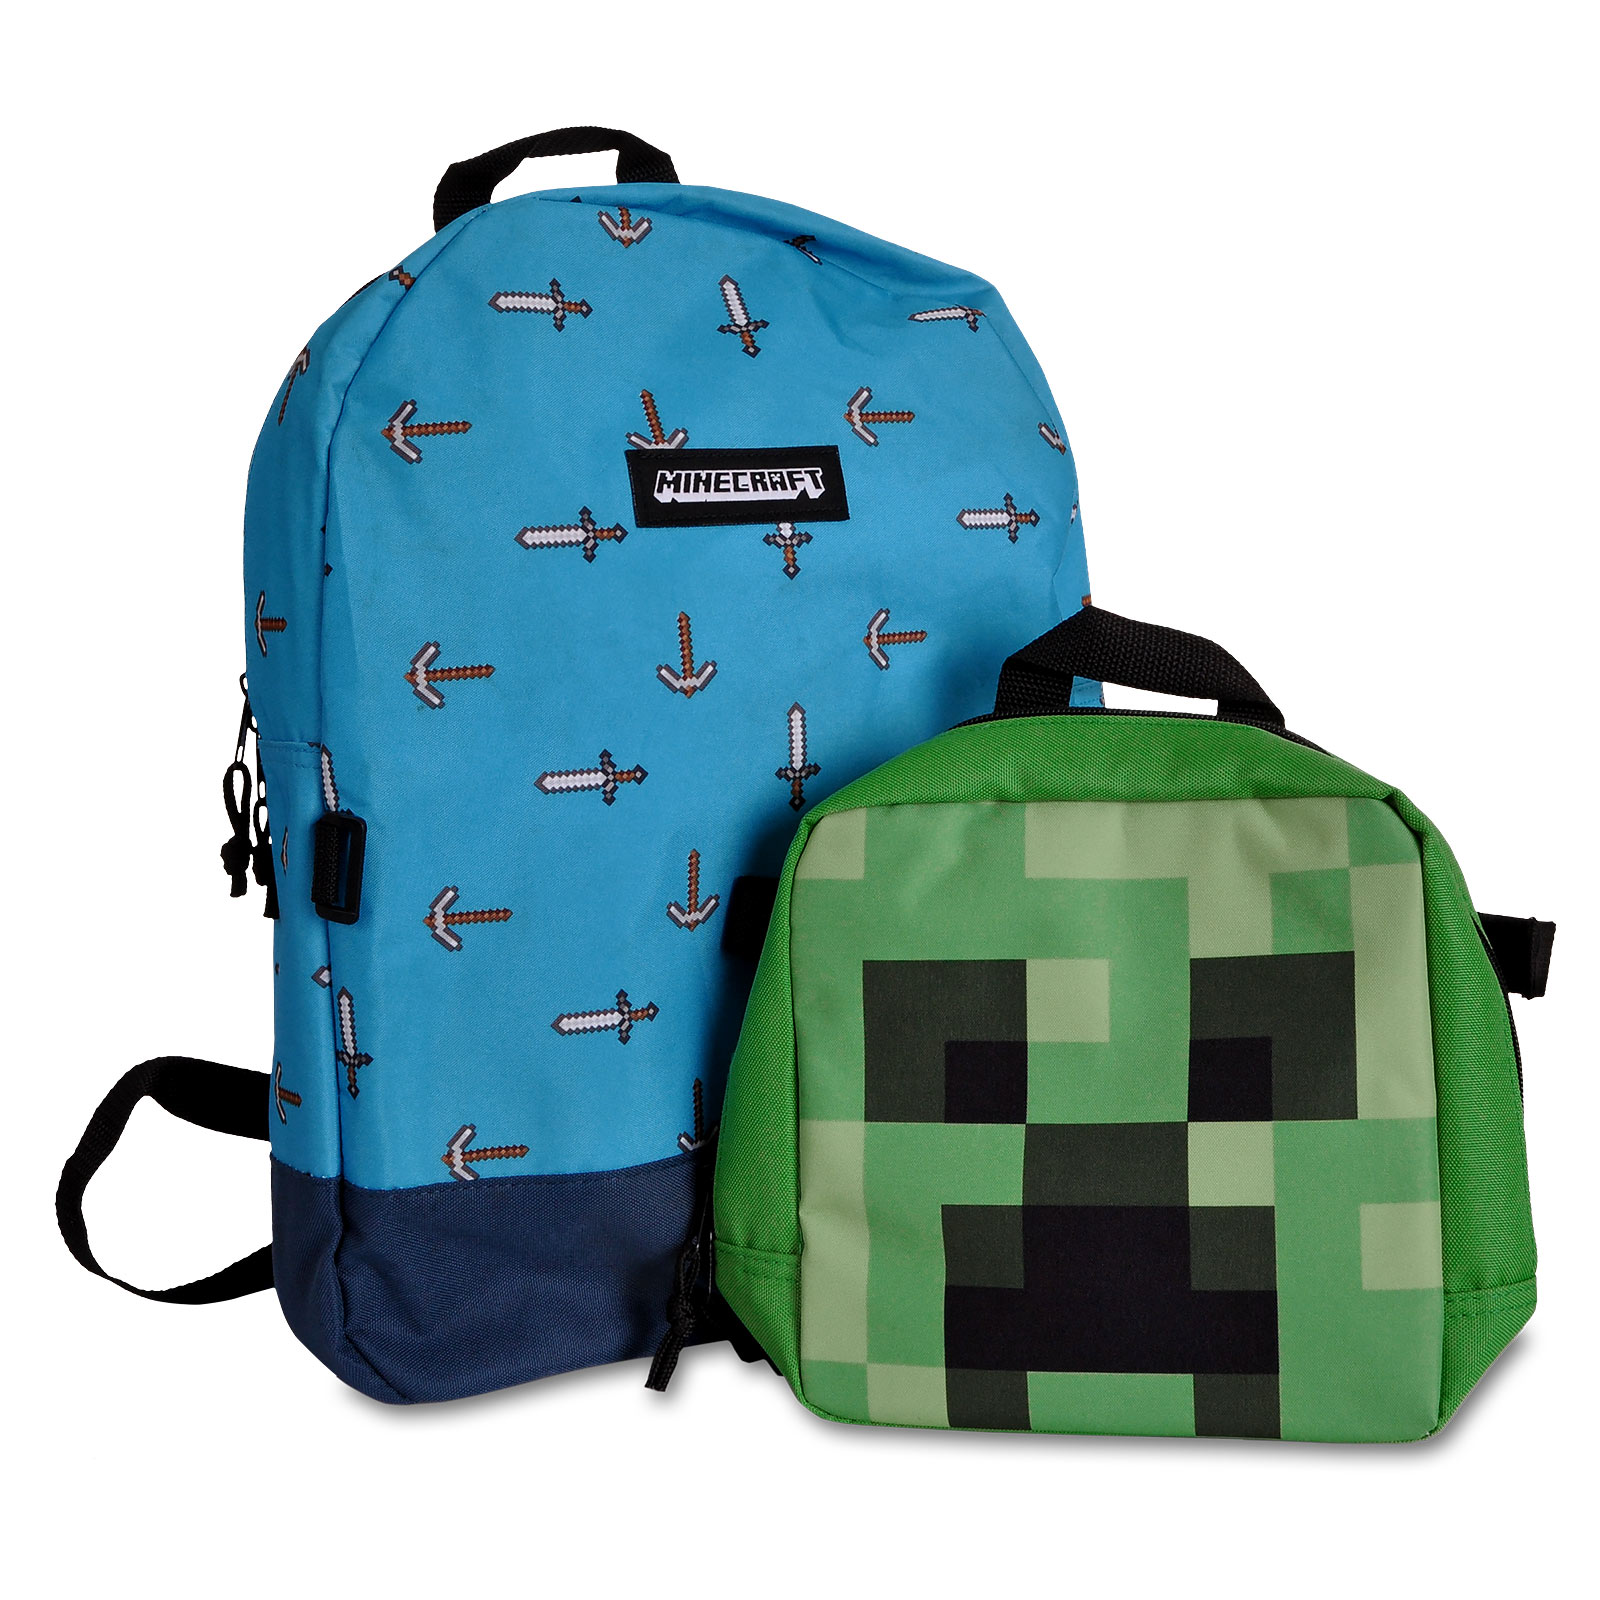 Minecraft - Sword & Axe Backpack with Creeper Mini Bag